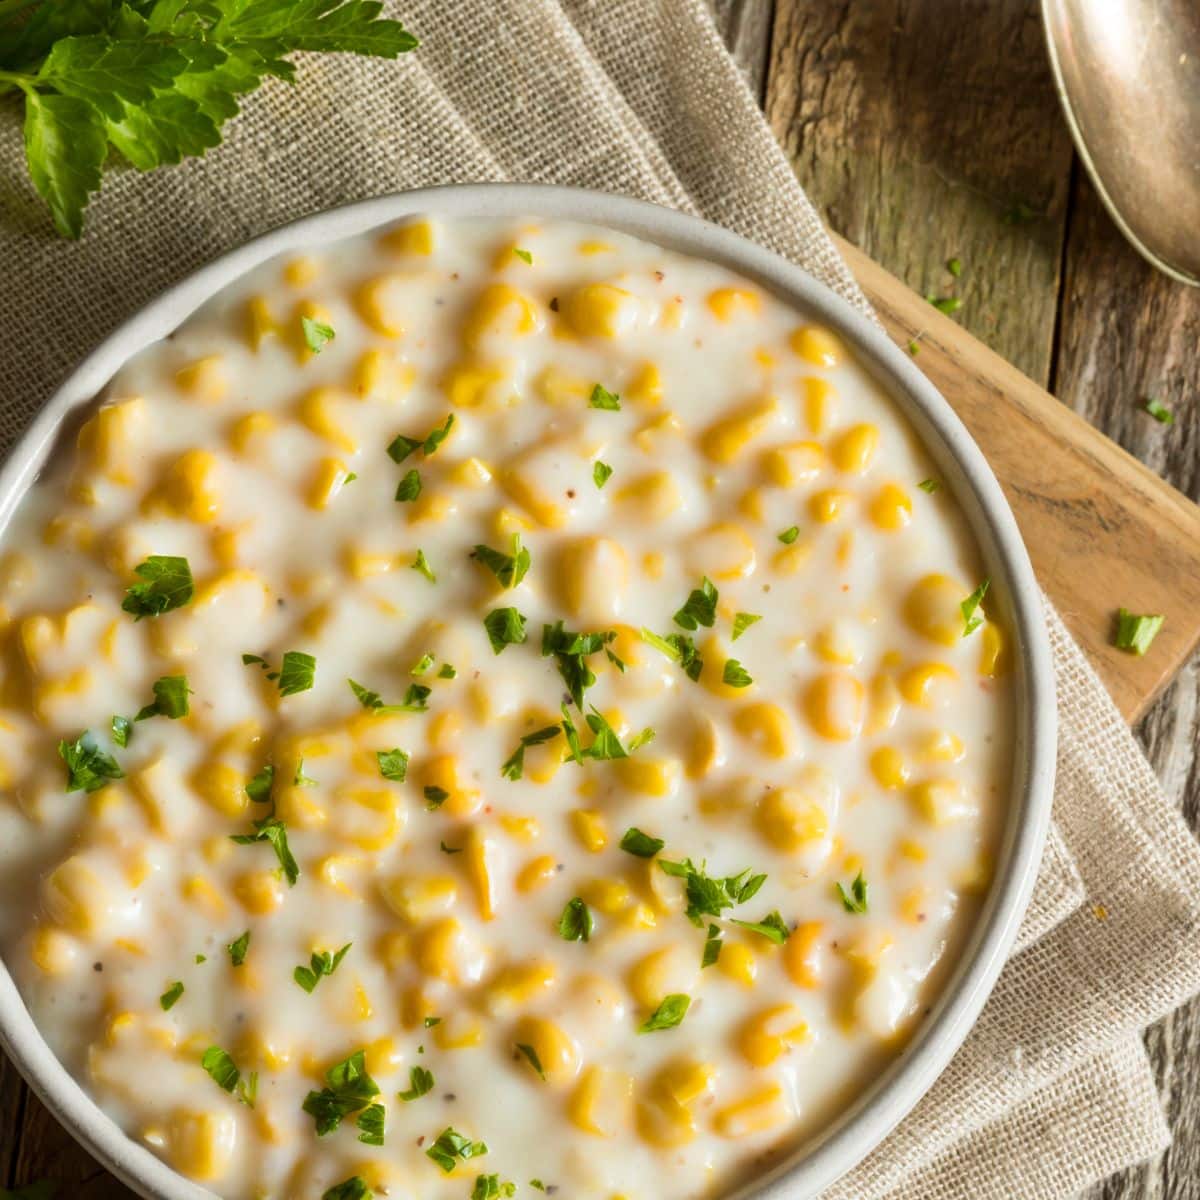 Best creamed corn recipe that cna be made with fresh, frozen, or canned corn served in beige bowl on wooden background.